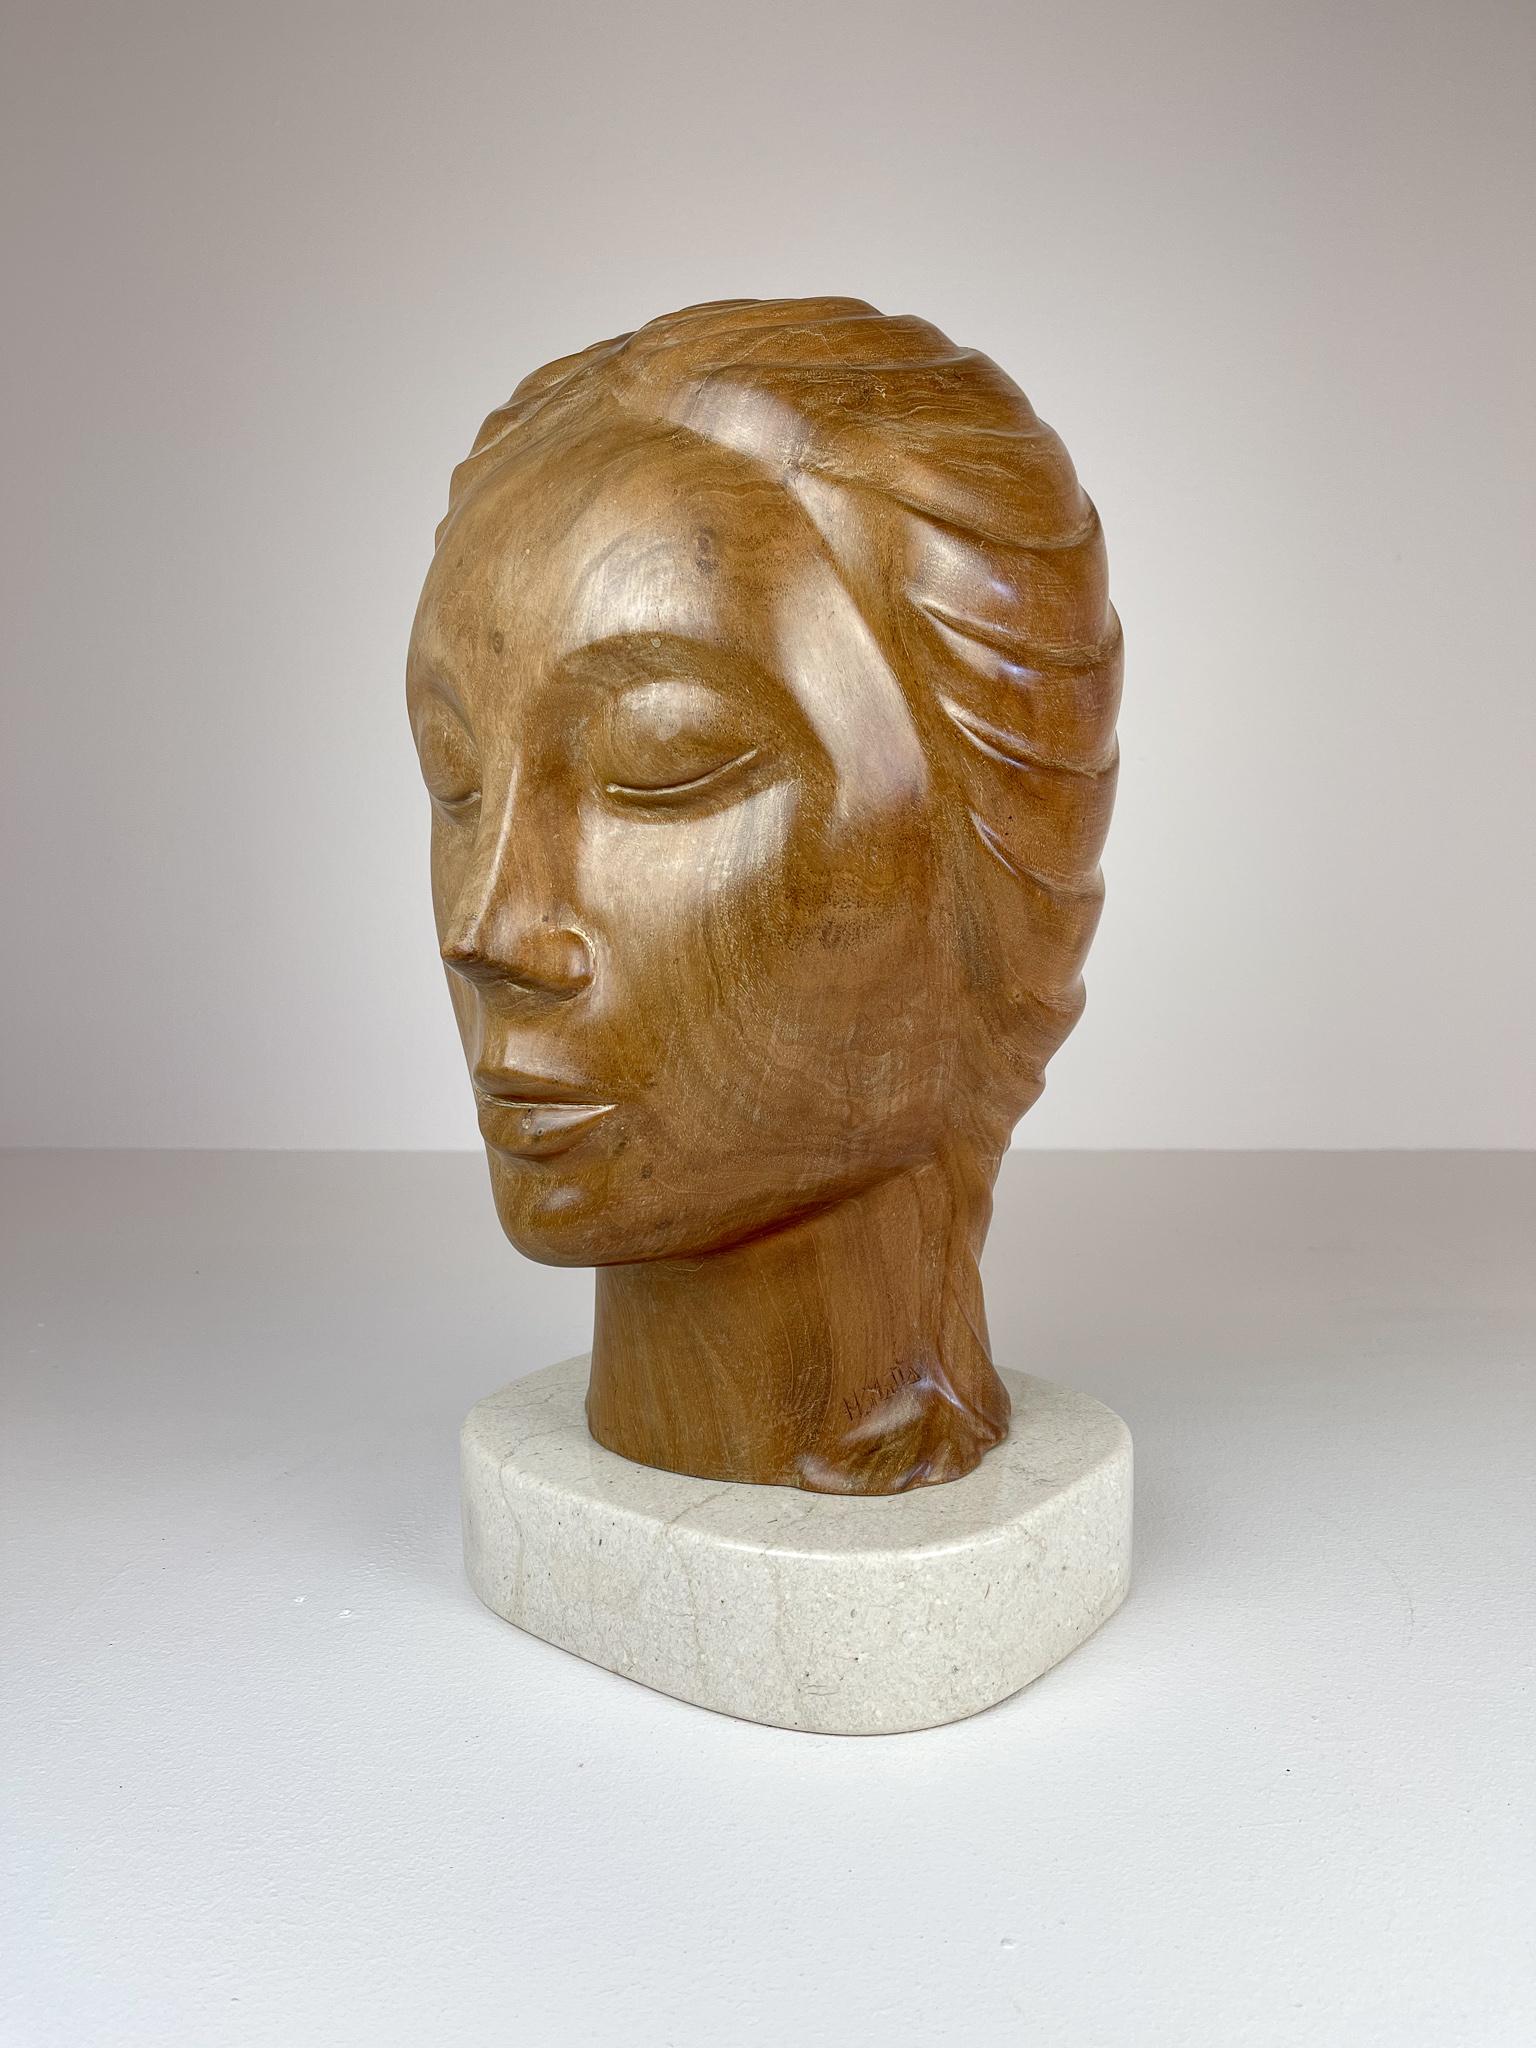 Dominican Large and Heavy Sculpture of a Female Face in Mahogany